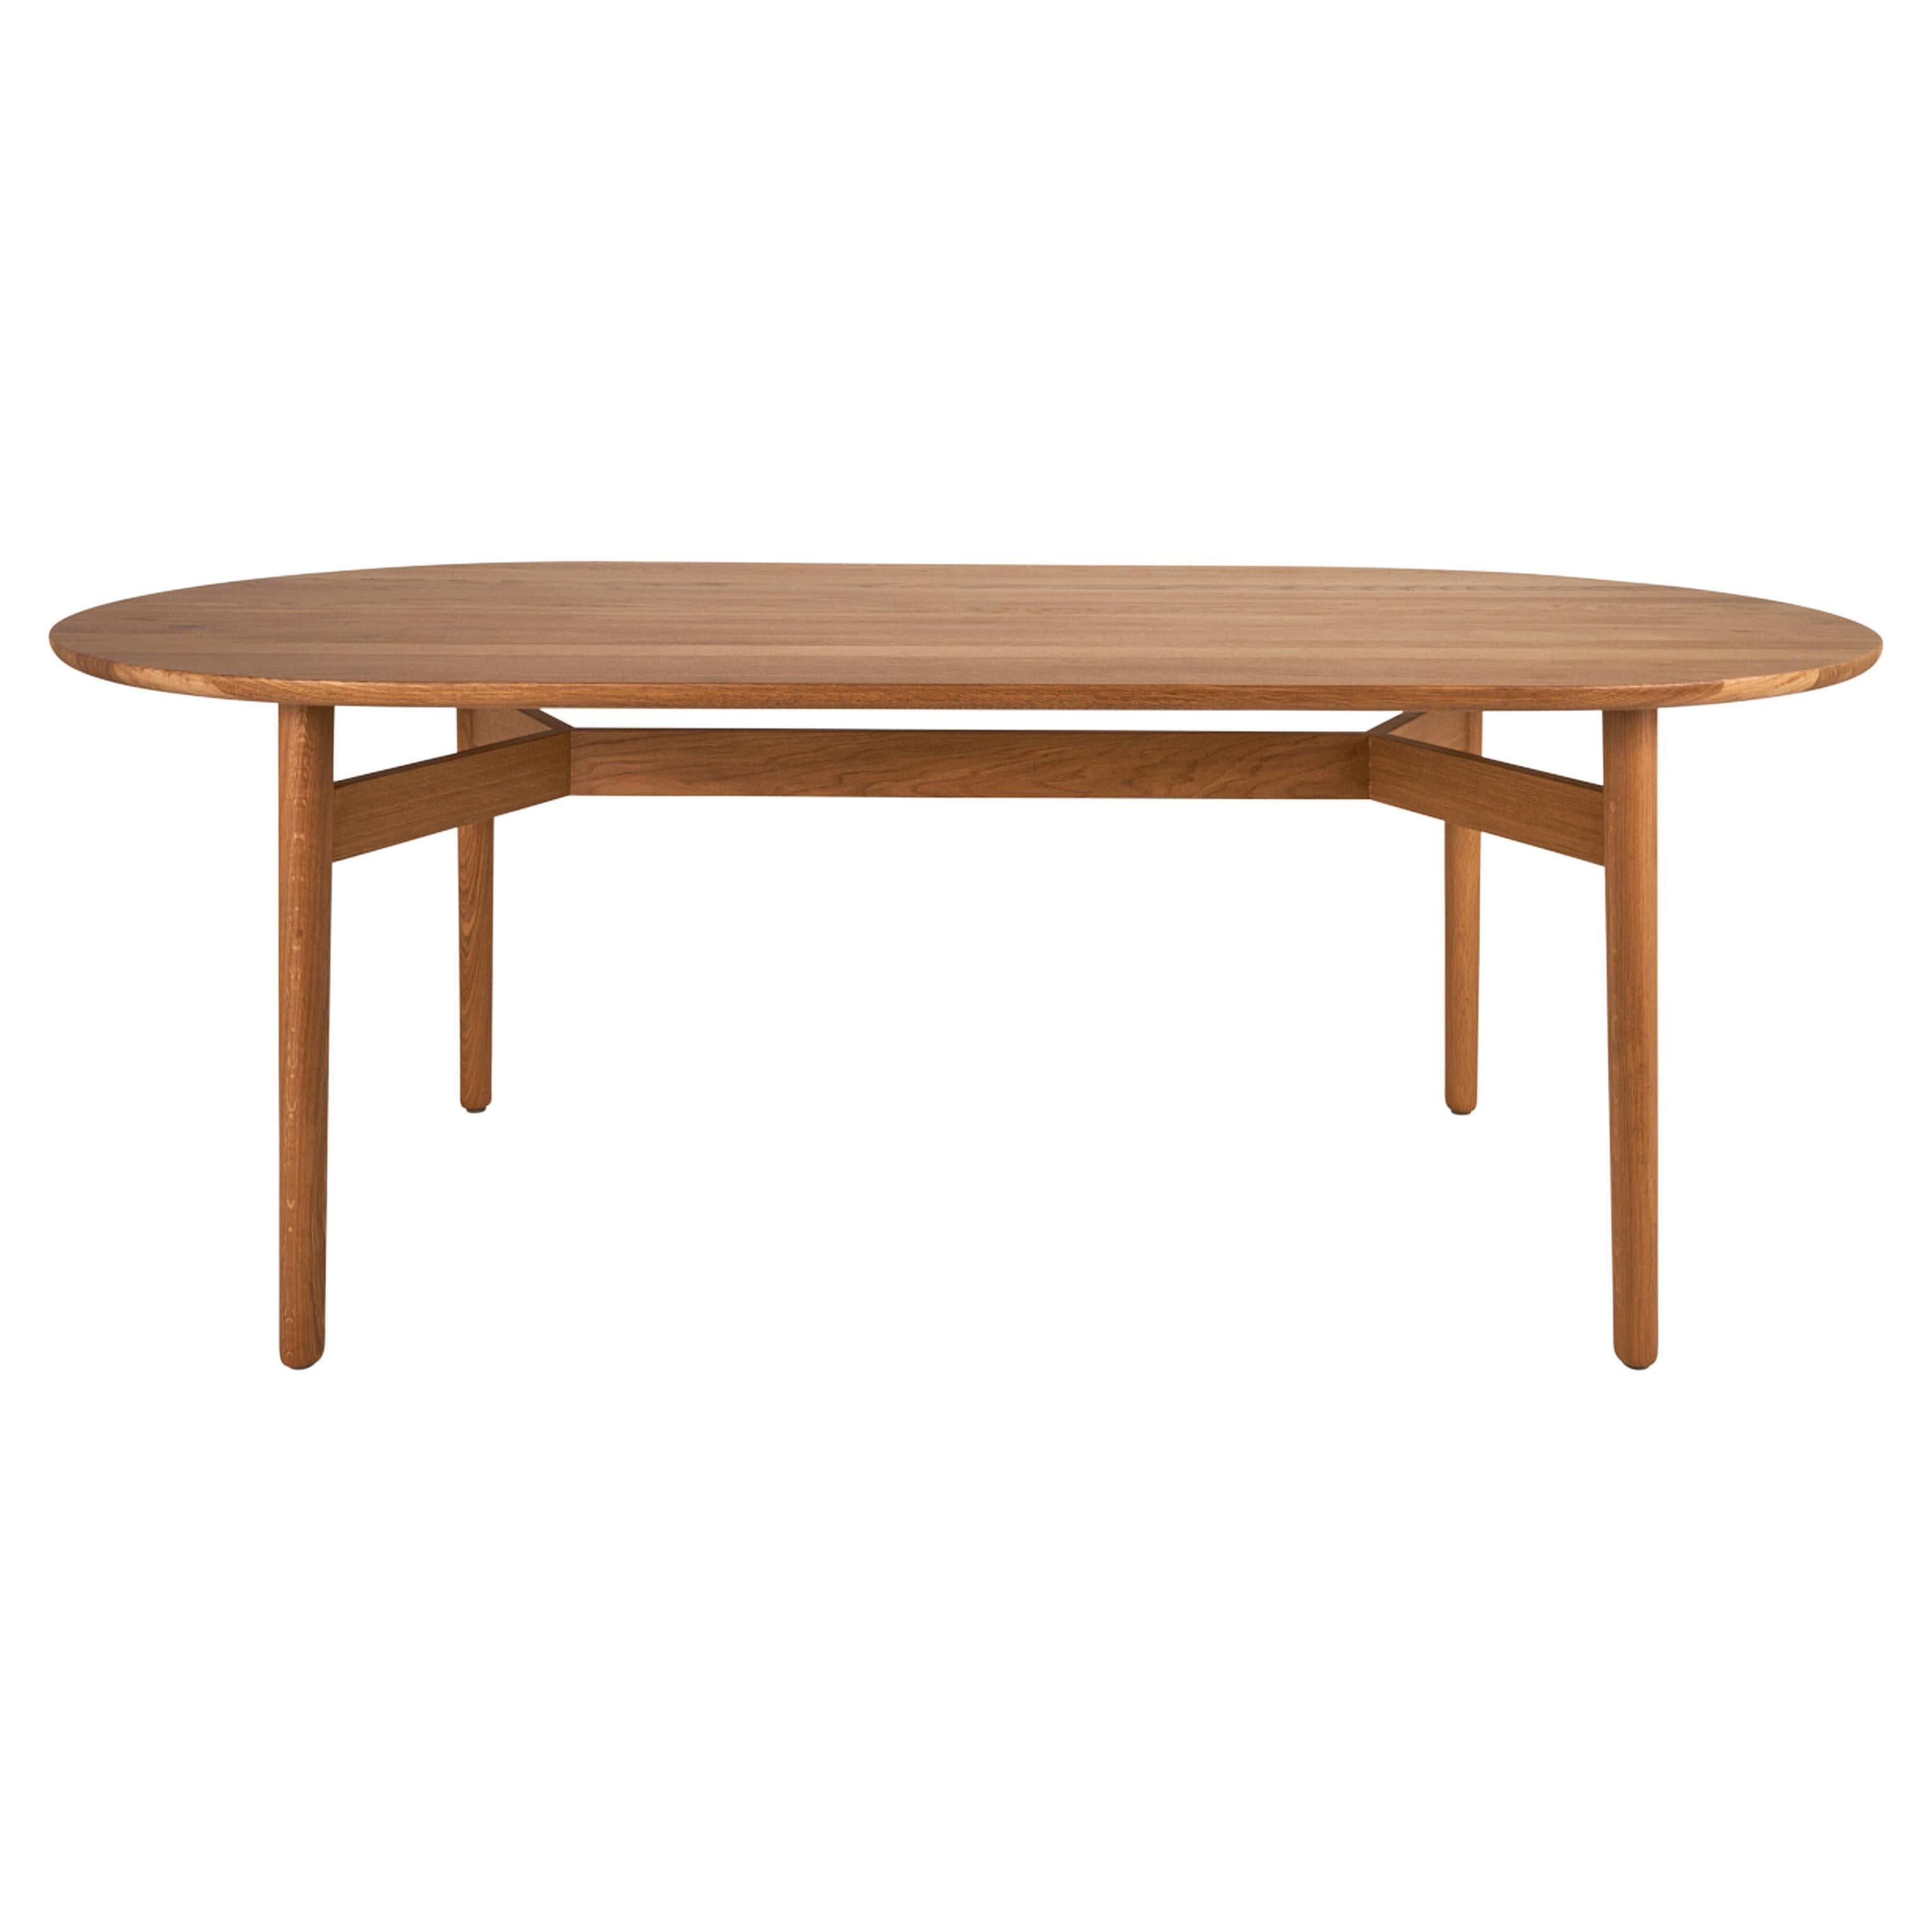 Schumacher Editions Puffin 98" Dining Table in Natural Matte